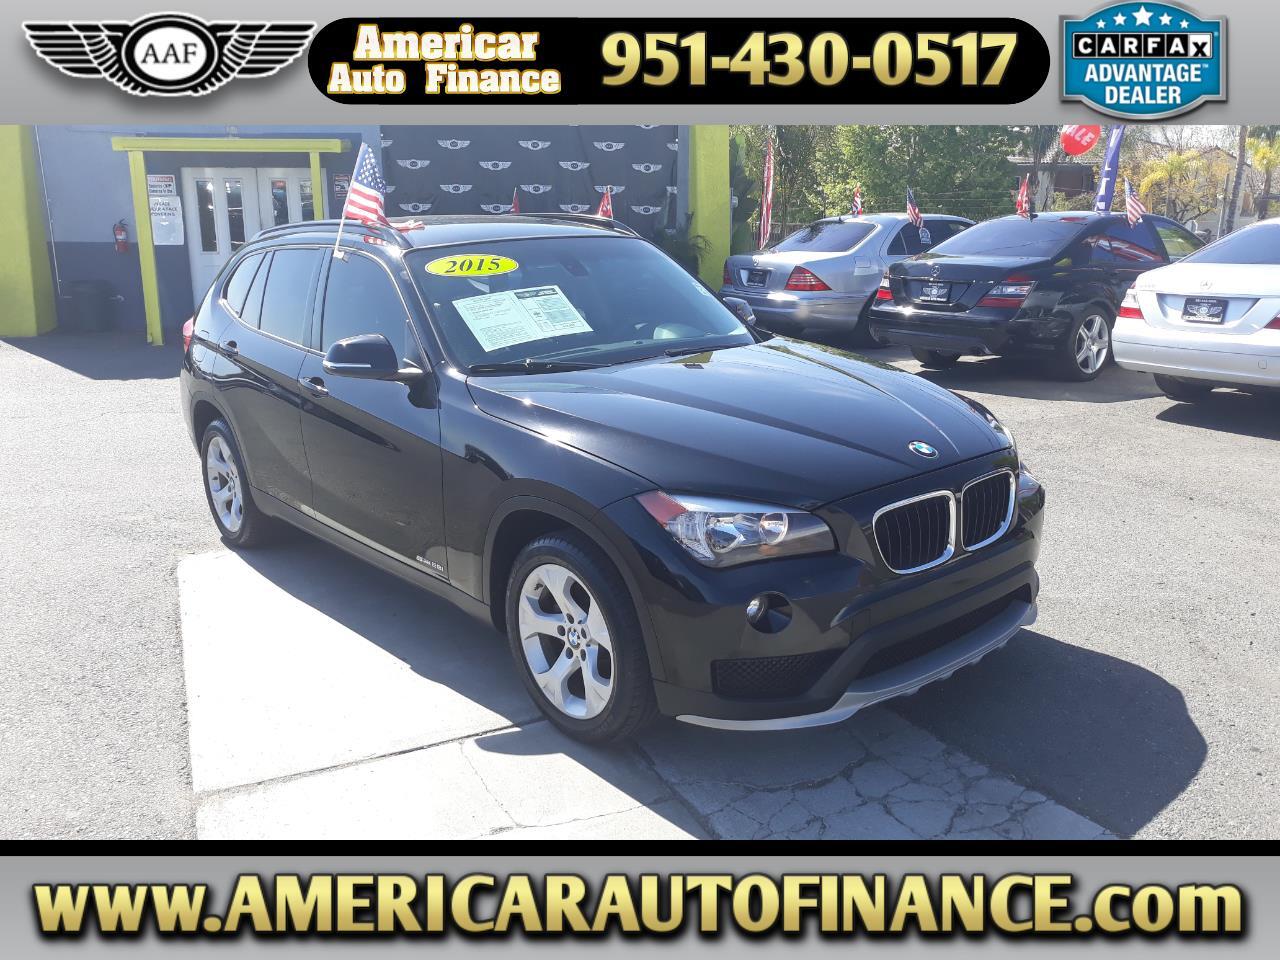 Used Bmw X1 Moreno Valley Ca